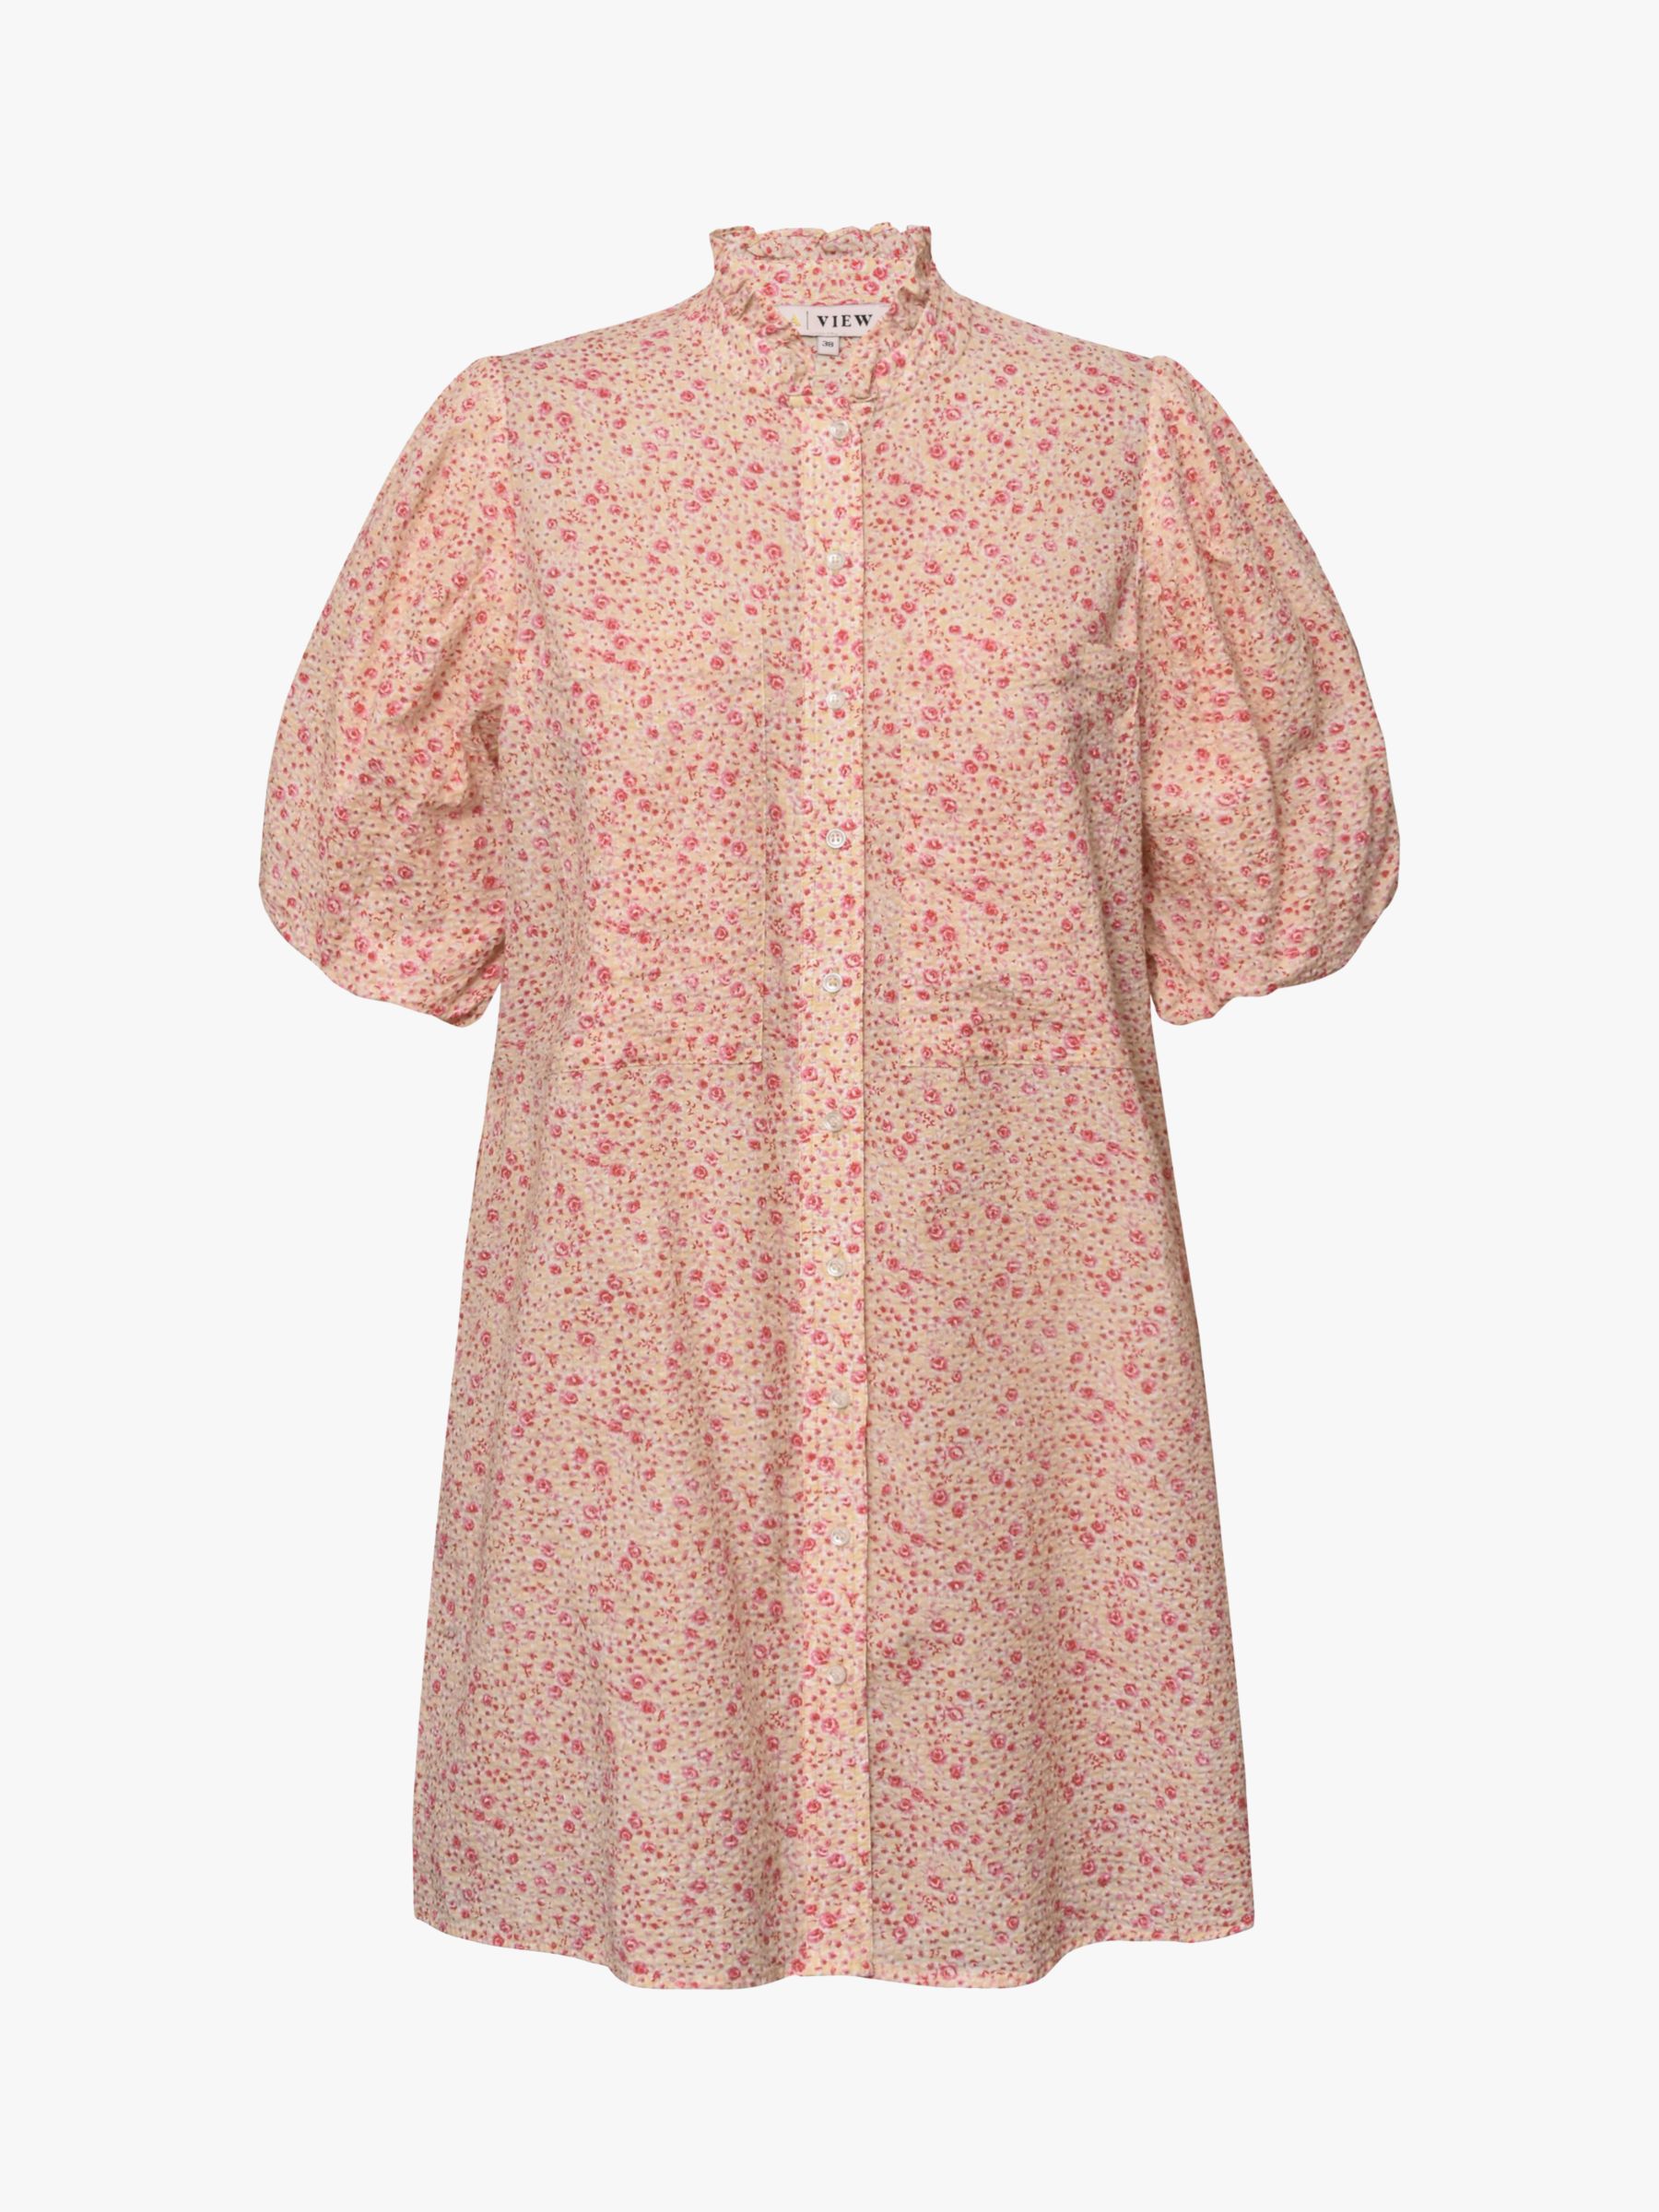 Buy A-VIEW Tiffany Floral Print Dress, Yellow/Rose Online at johnlewis.com